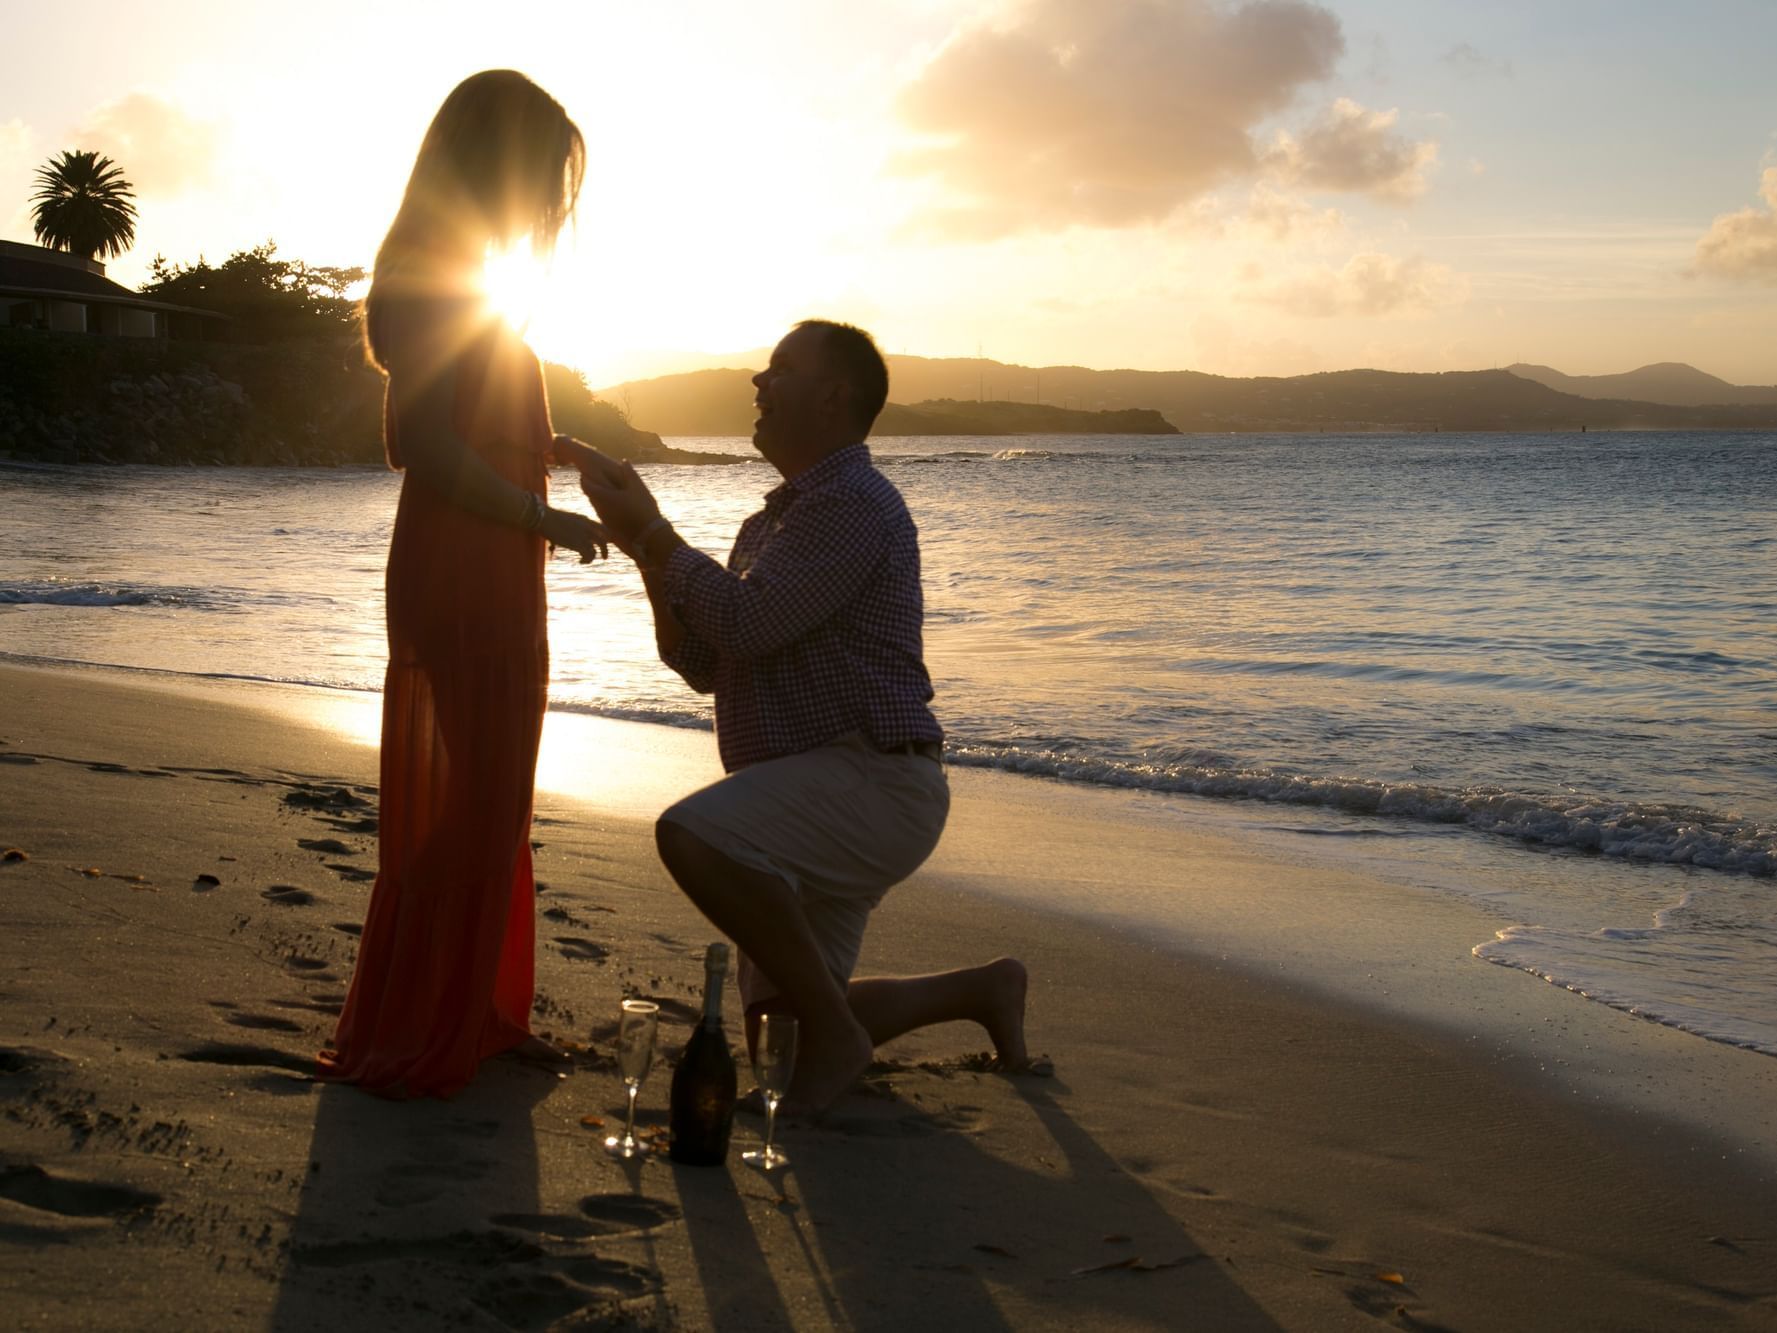 A marriage proposal on the beach in Buccaneer Hotel at sunset